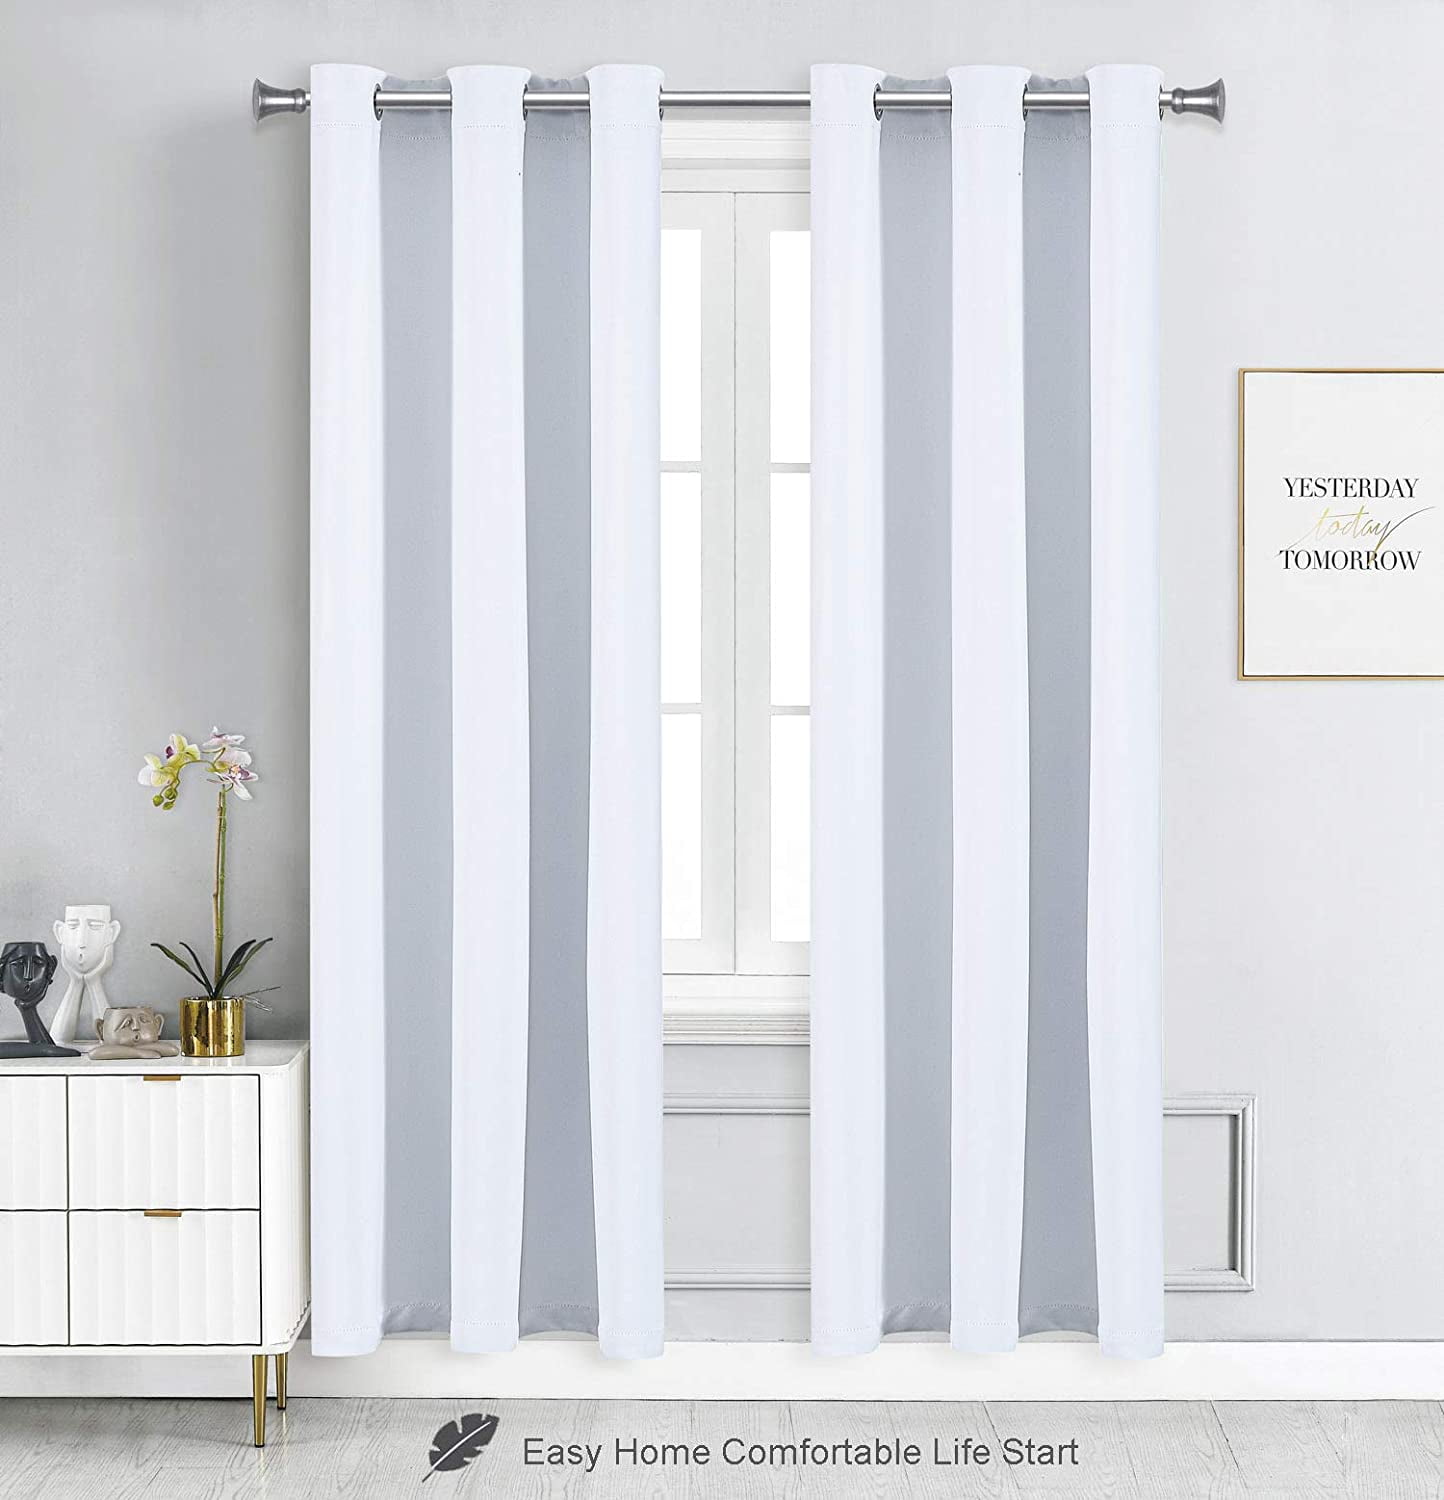 Details about   Twill Linen Curtains Living Room Blackout Curtains Bedroom Kitchen Fabric Drapes 